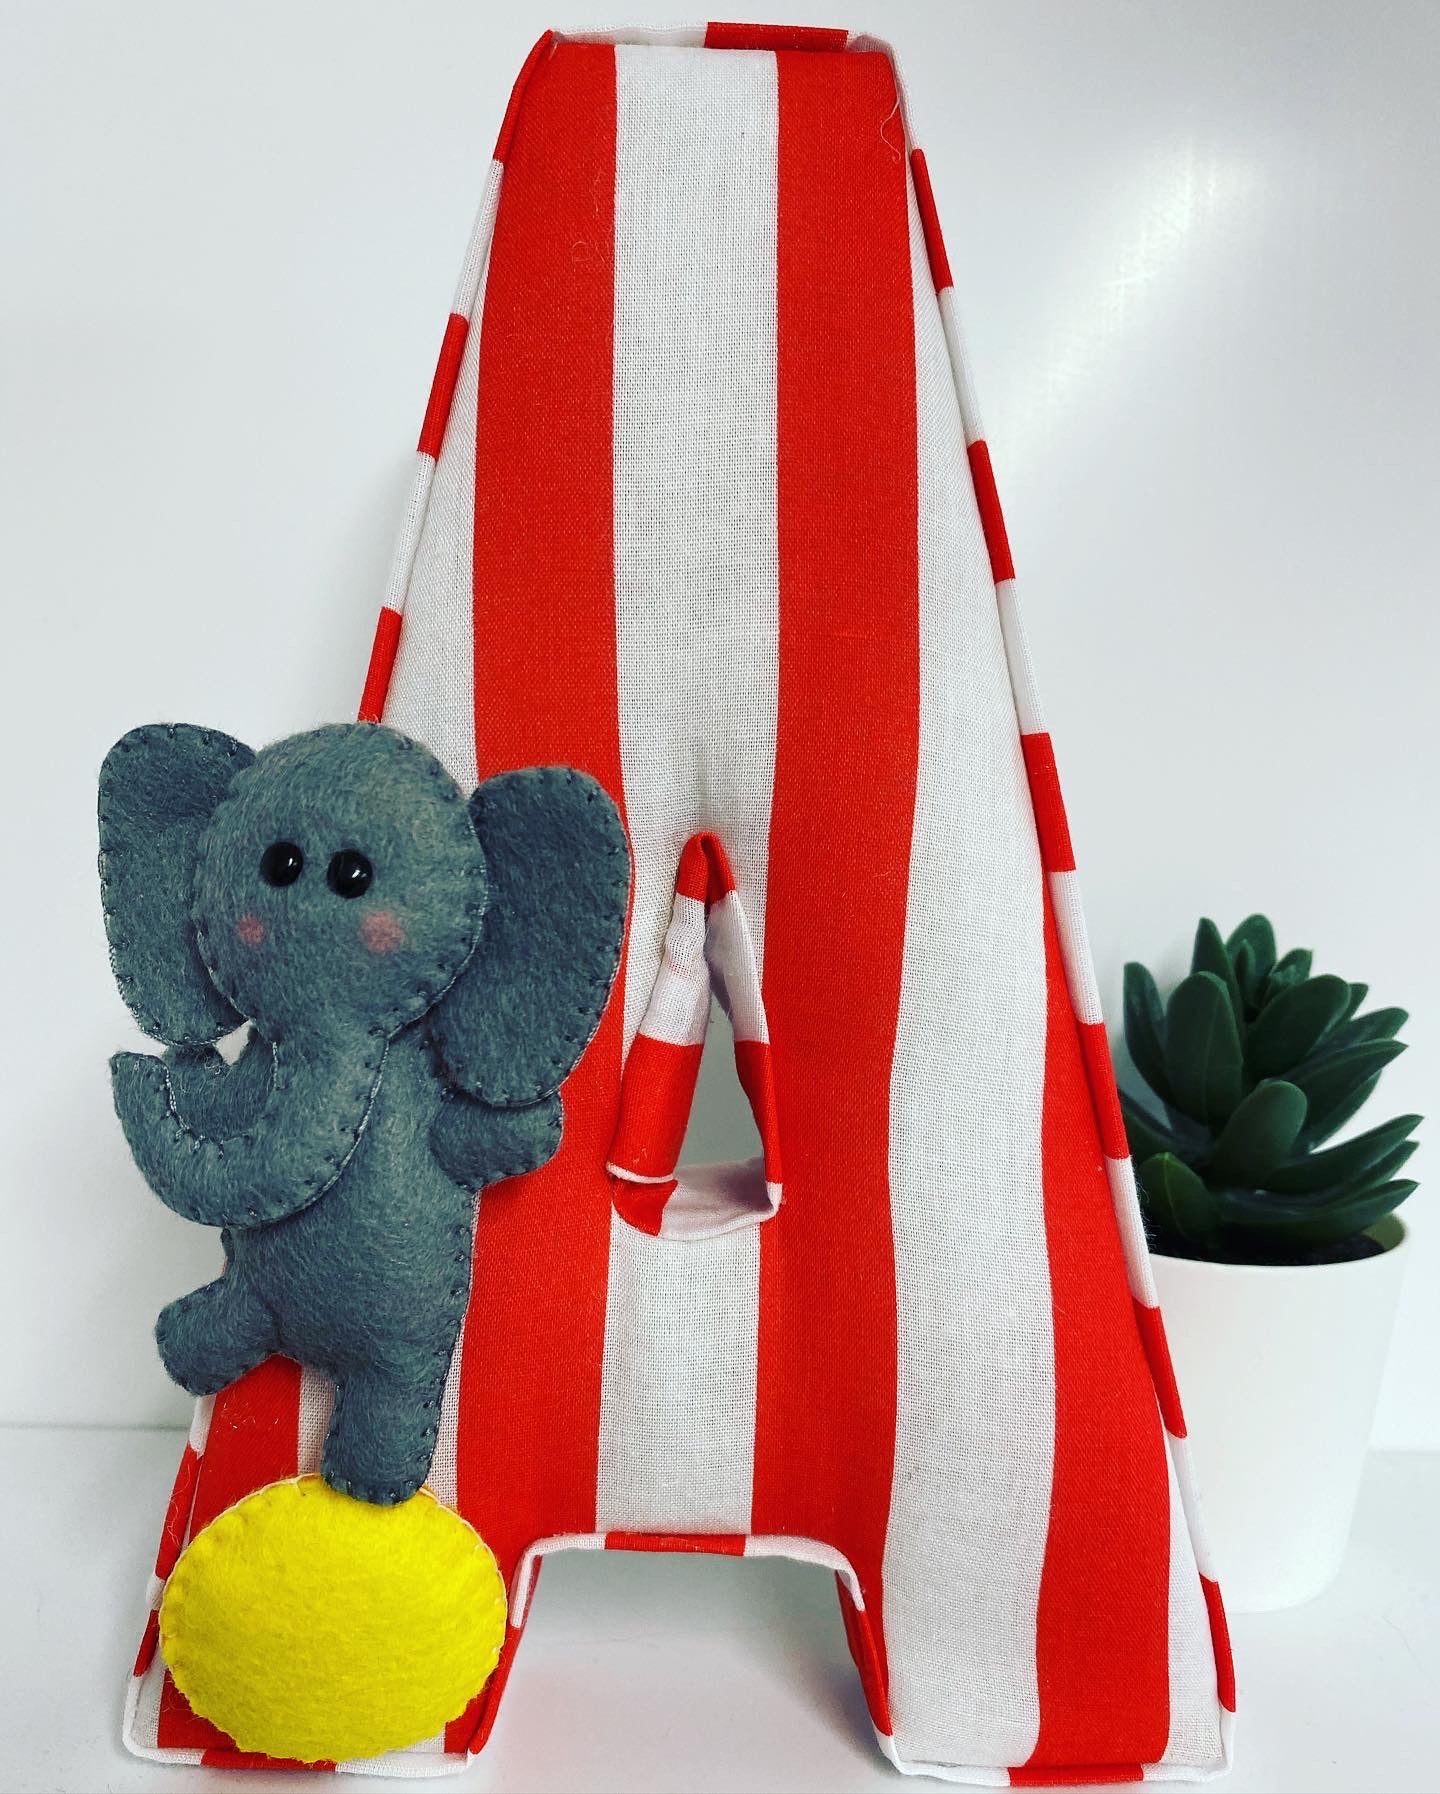 Personalised circus fabric letter with felt character